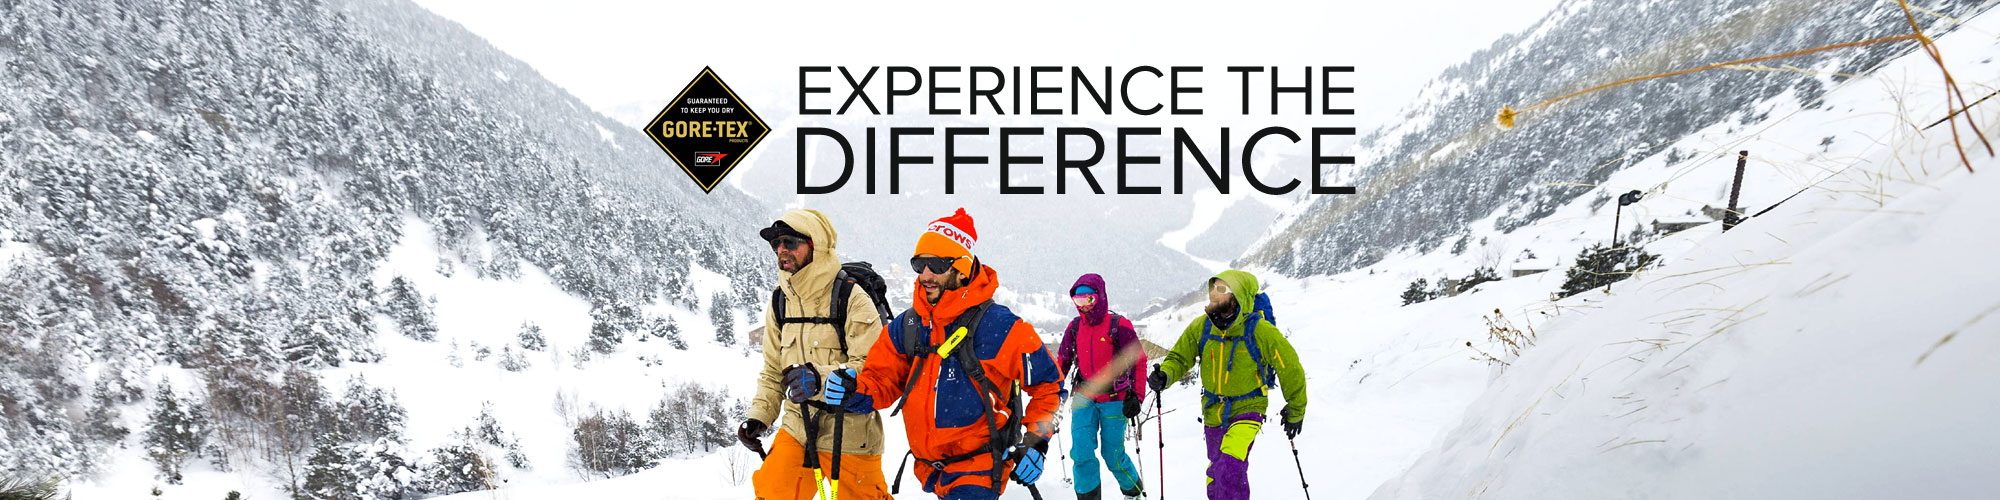 Experience the Difference with GORE-TEX Products